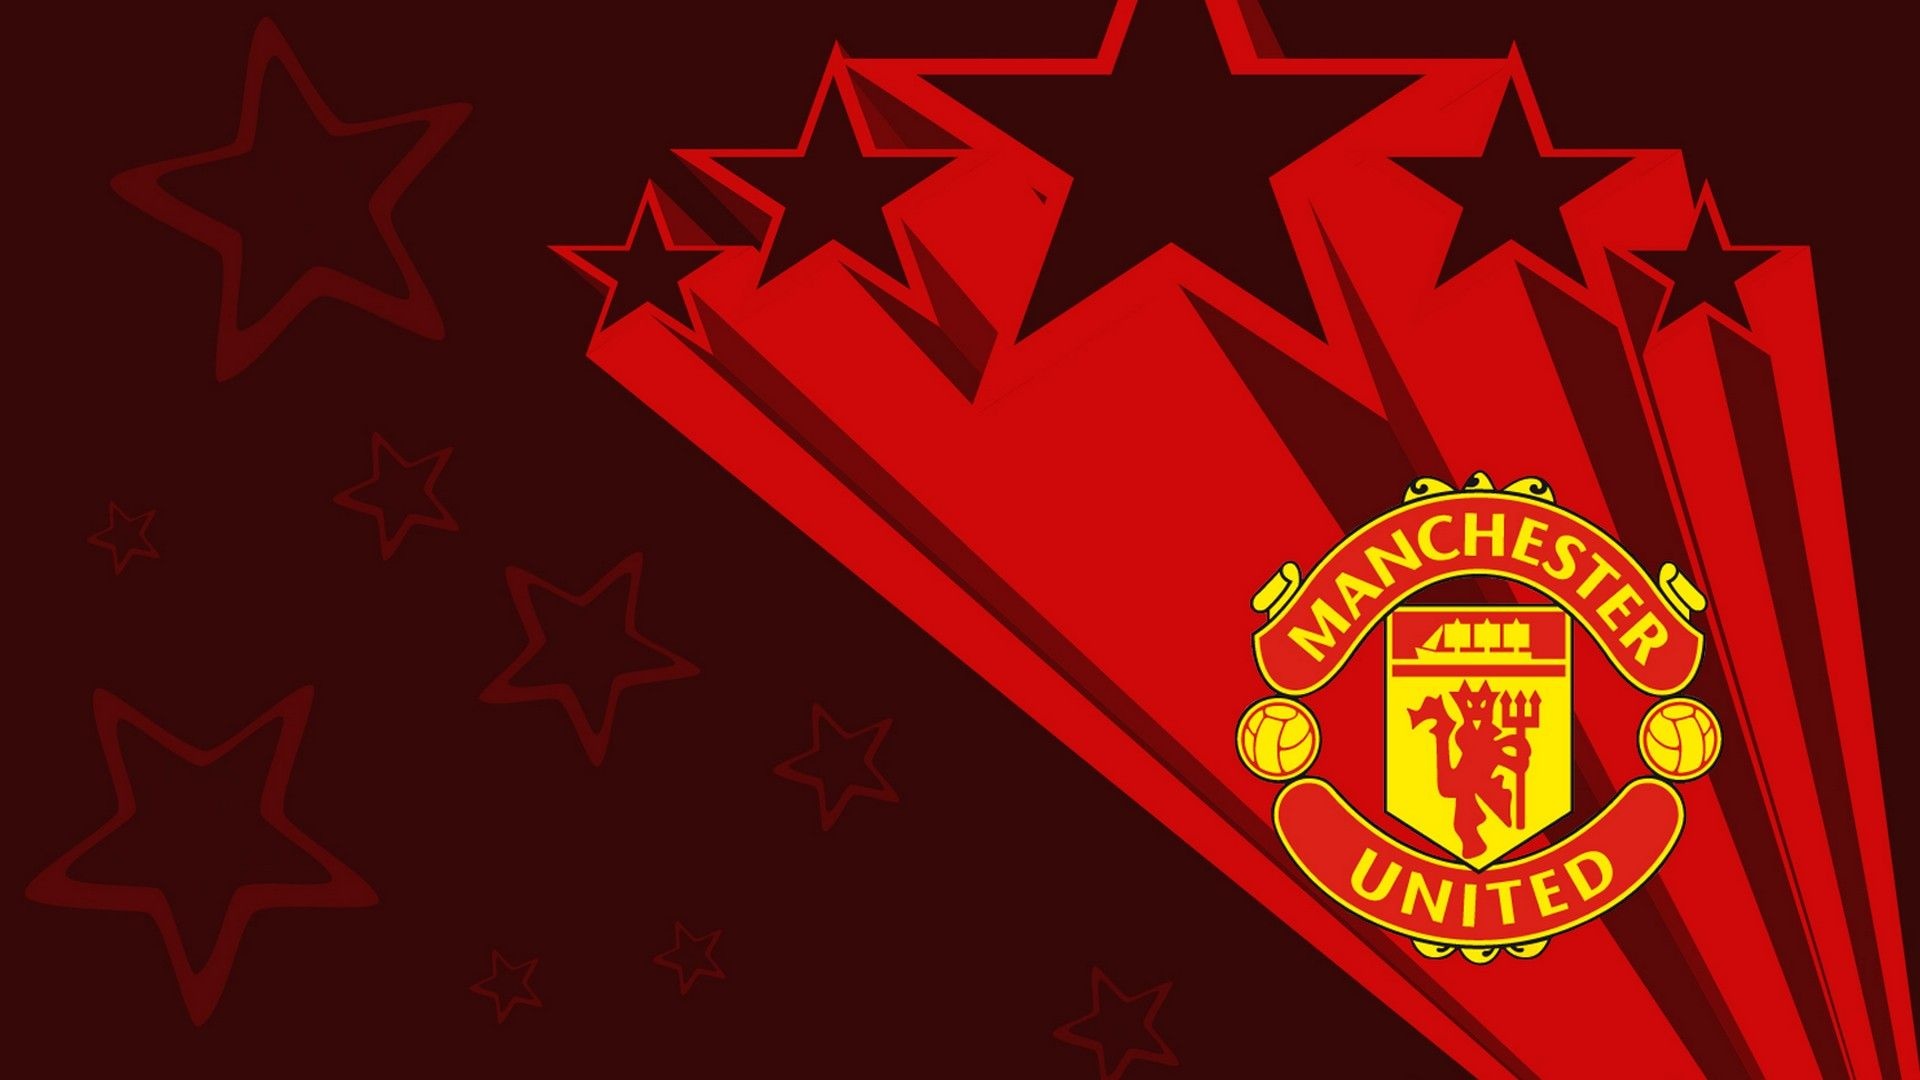 Manchester United: The club defeated Bayern Munich in the 1999 UEFA Champions League final. 1920x1080 Full HD Wallpaper.